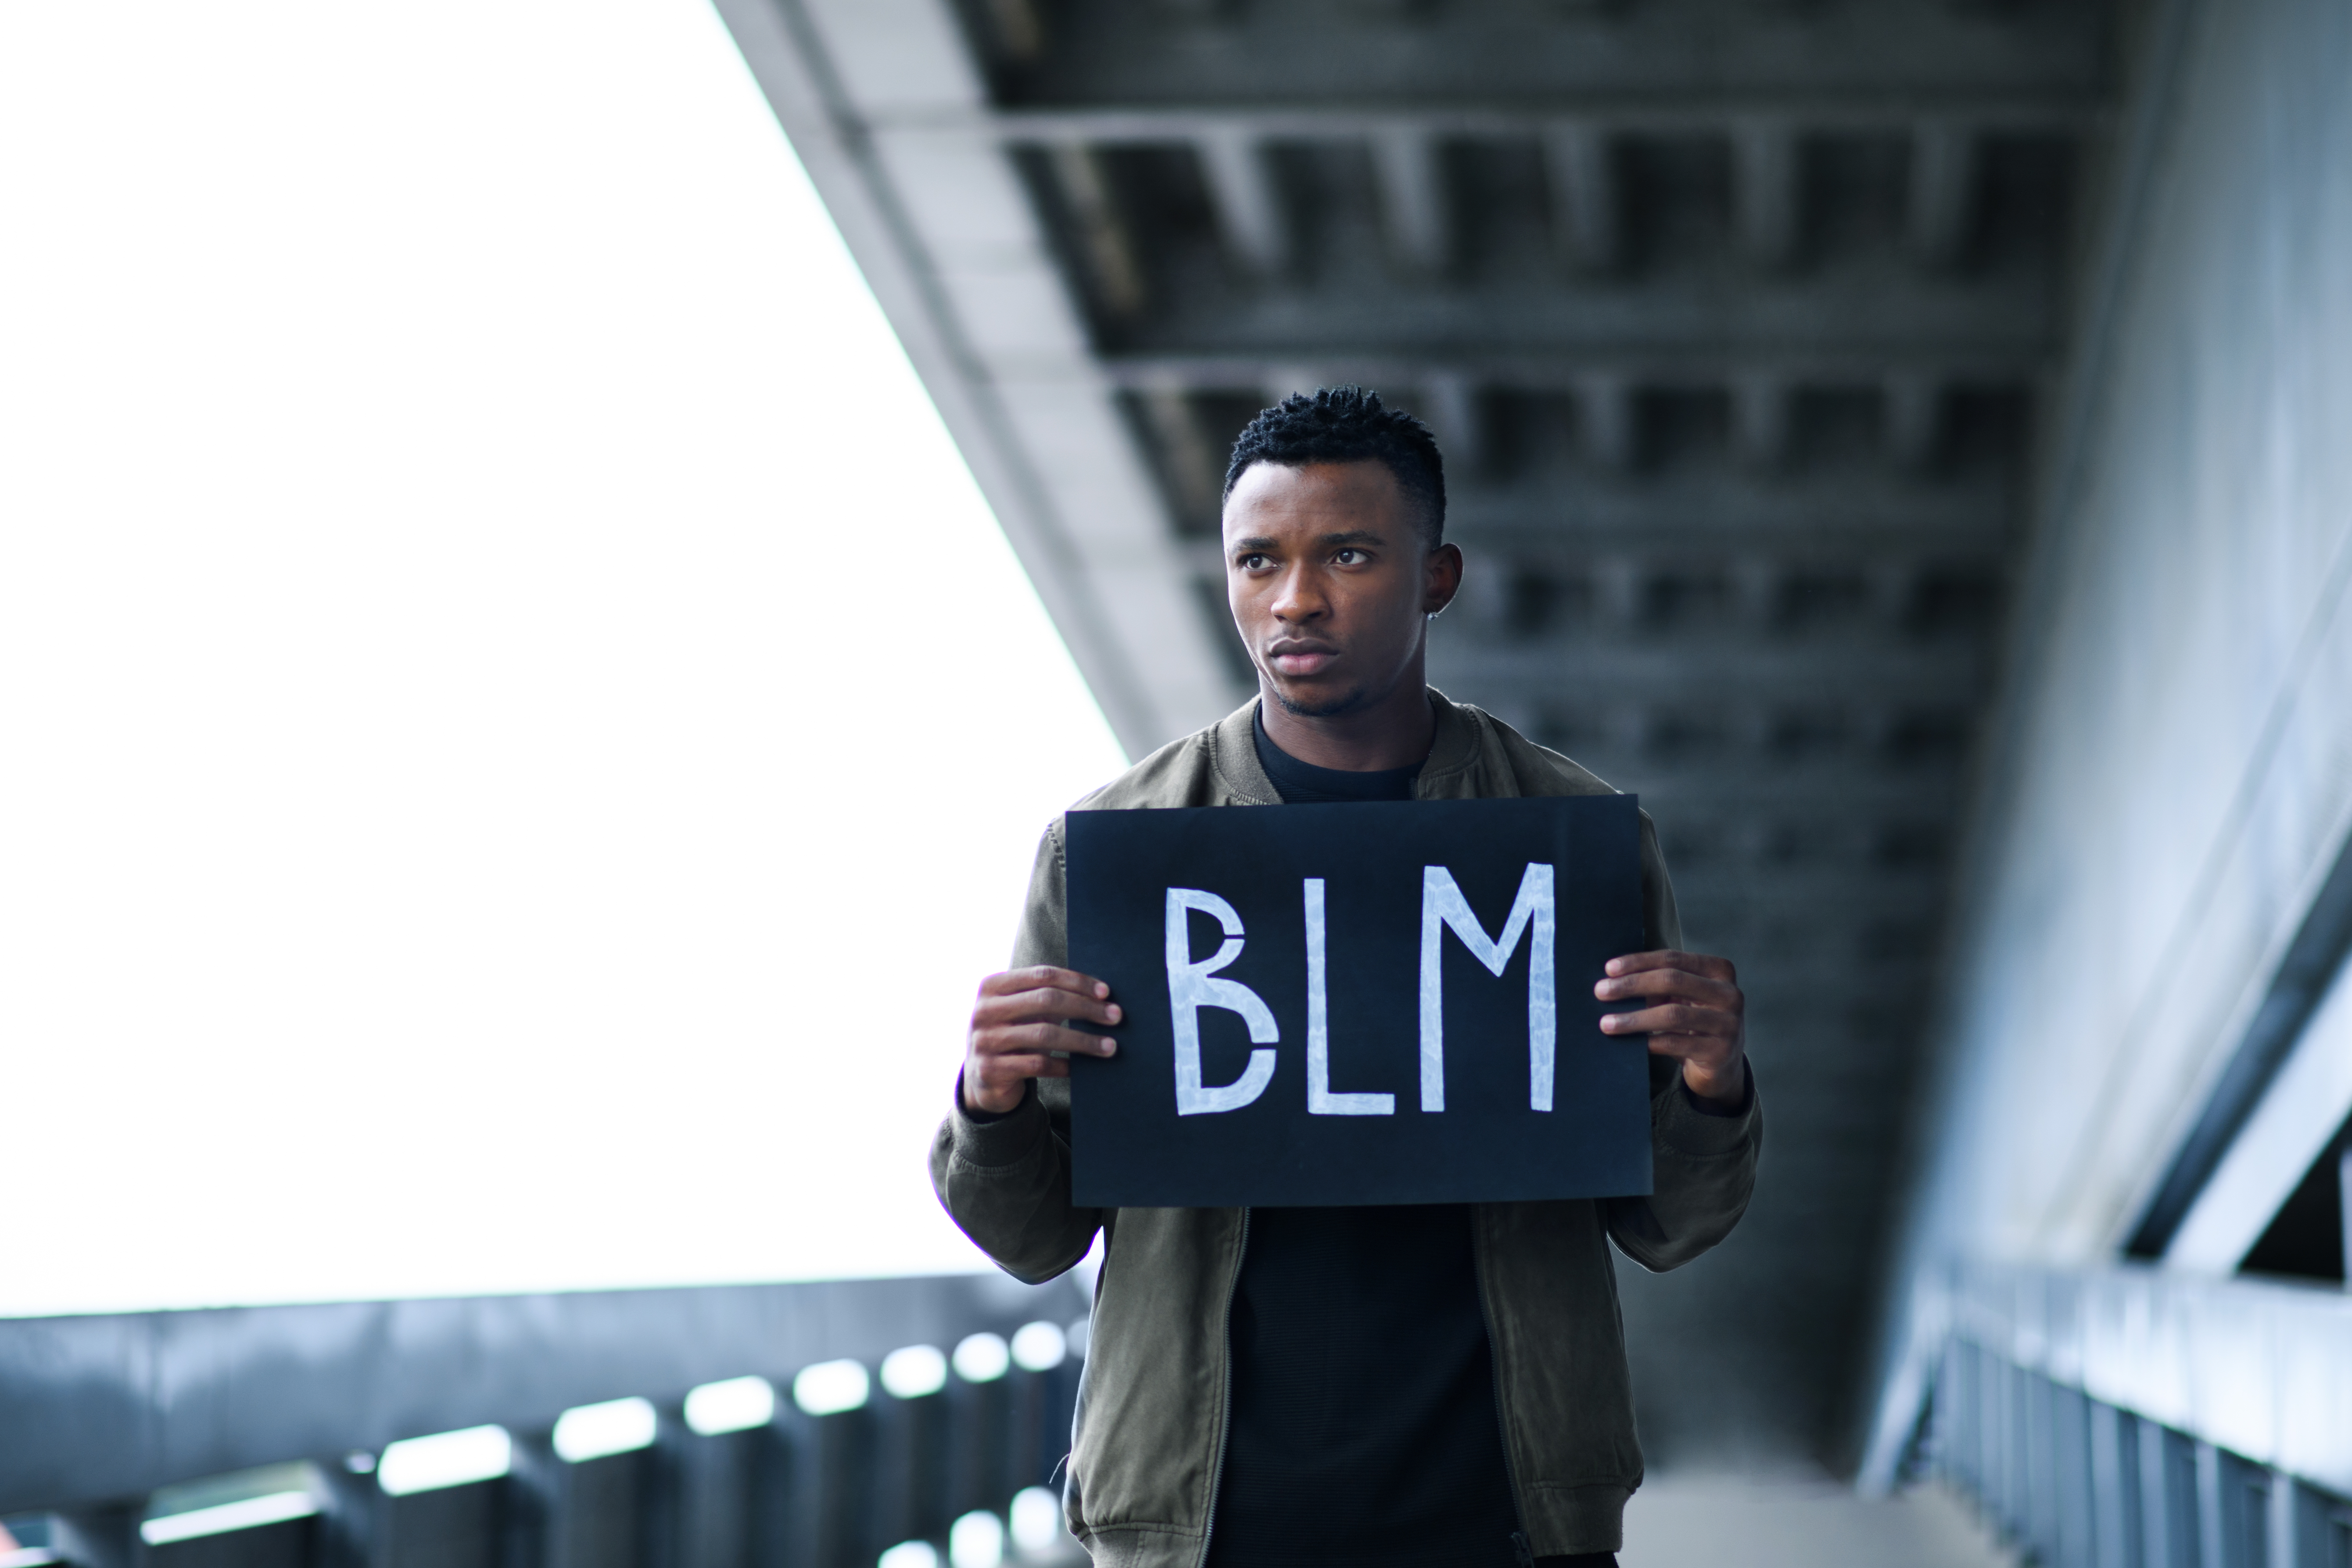 BLM young man hoding sign